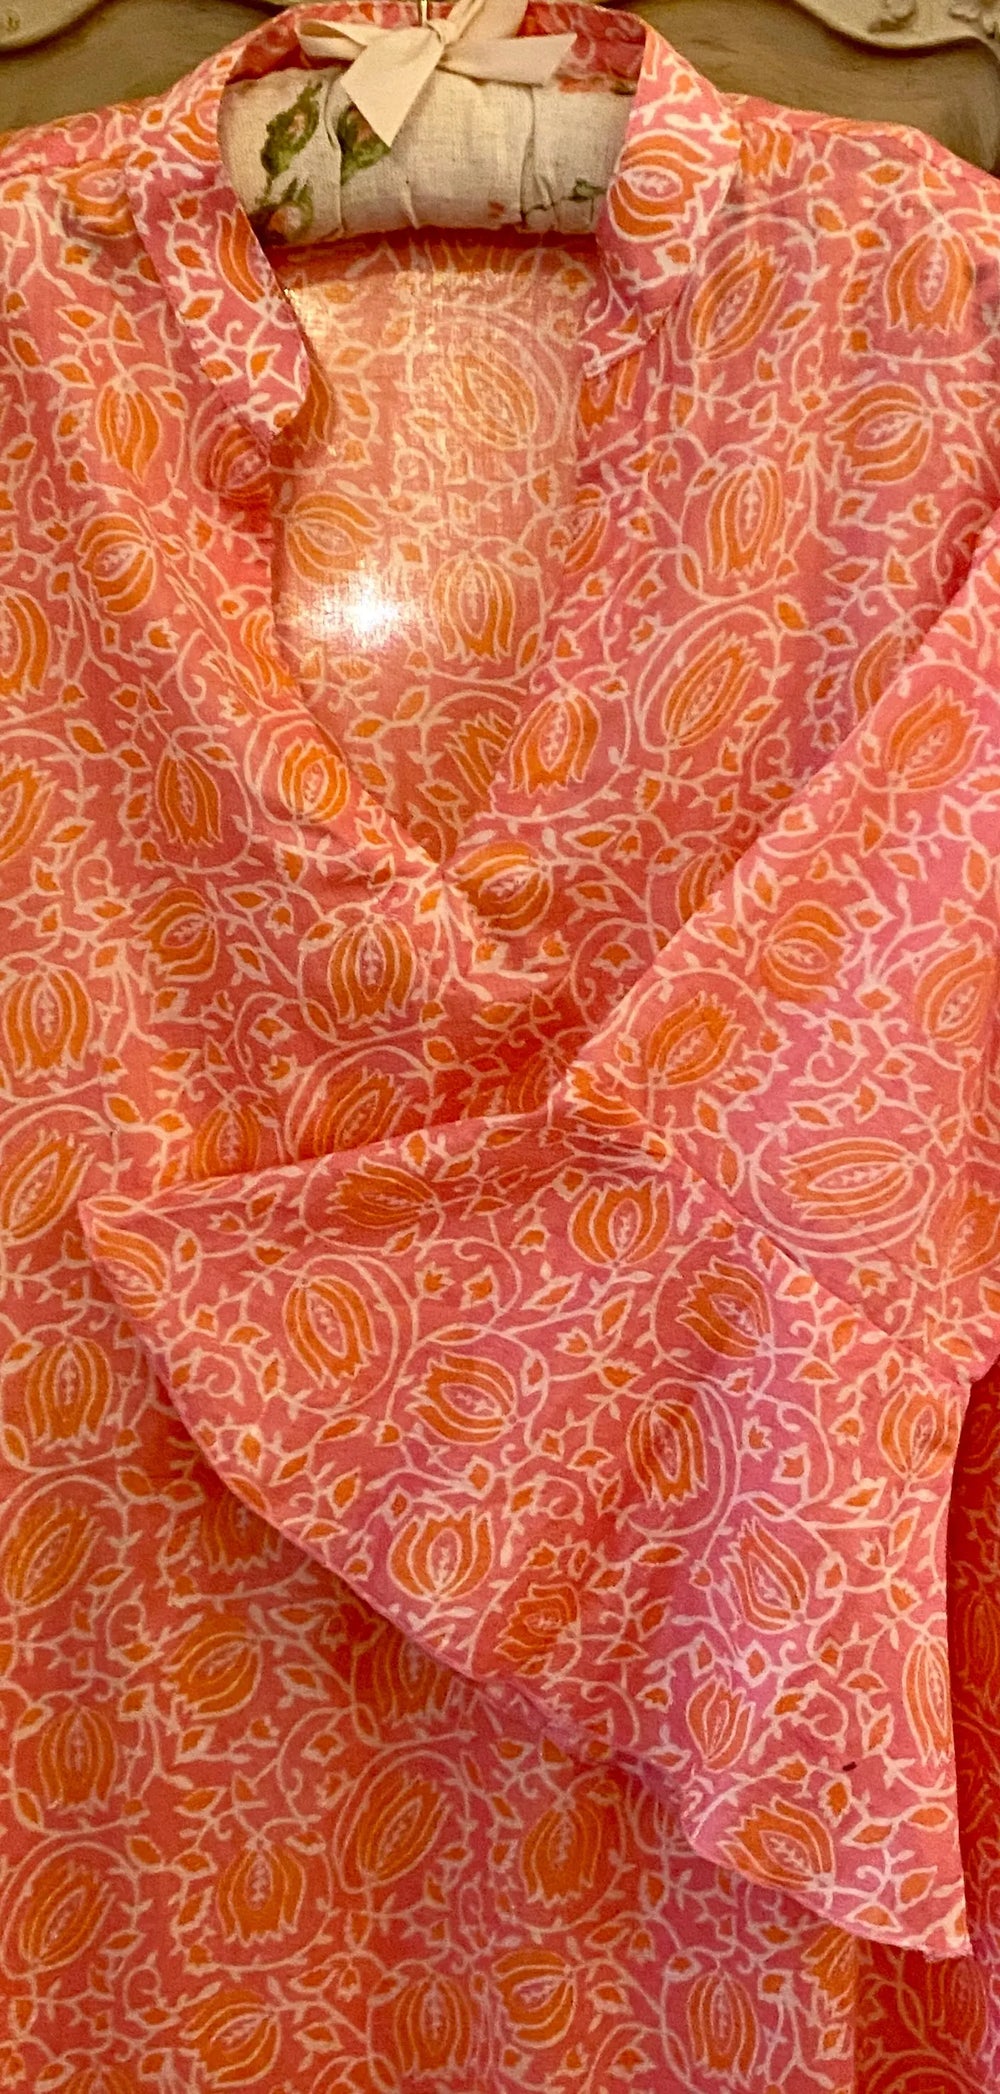 Sunni is an ultra luxurious, organic pure cotton nightie with bell sleeve in pink glow with orange. It is invariably mistaken for silk.   Extremely comfortable and light and feels beautiful to sleep in - the moment you put it on, it feels heavenly.   Elegant, ethereal and so pretty with a pretty neckline and gorgeous bell sleeve  The model is usually a size 8 but seen here in our size 12 sample   Superb workmanship and has been produced in a happy workshop well known to us under excellent working conditions